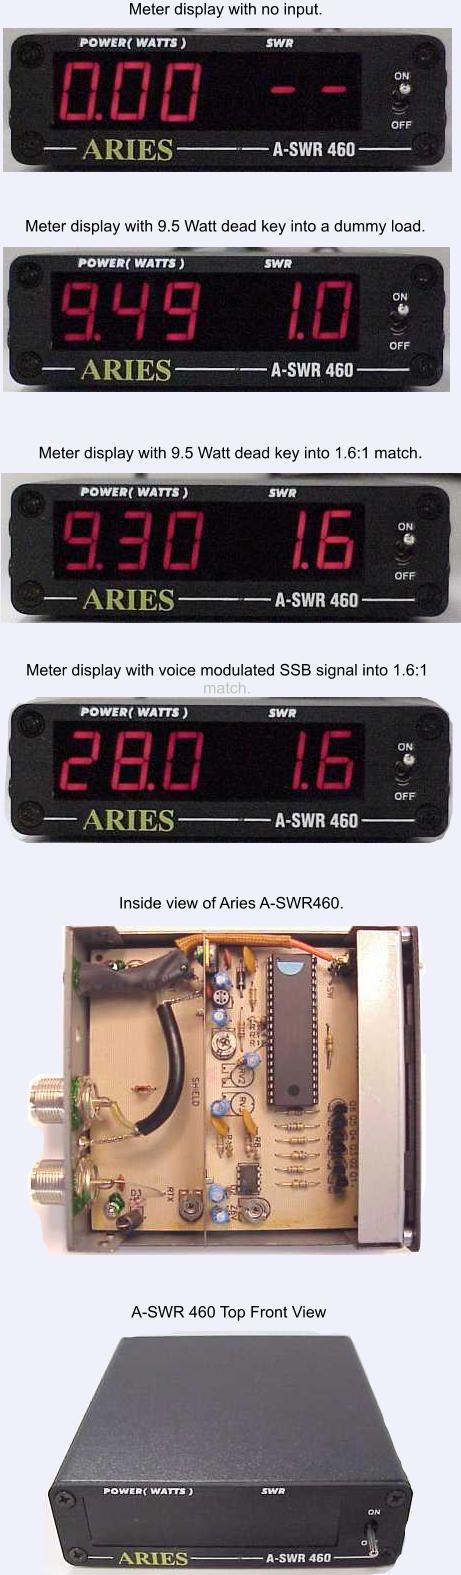 Meter display with voice modulated SSB signal into 1.6:1 match. A-SWR 460 Top Front View Inside view of Aries A-SWR460. Meter display with 9.5 Watt dead key into 1.6:1 match. Meter display with 9.5 Watt dead key into a dummy load. Meter display with no input.